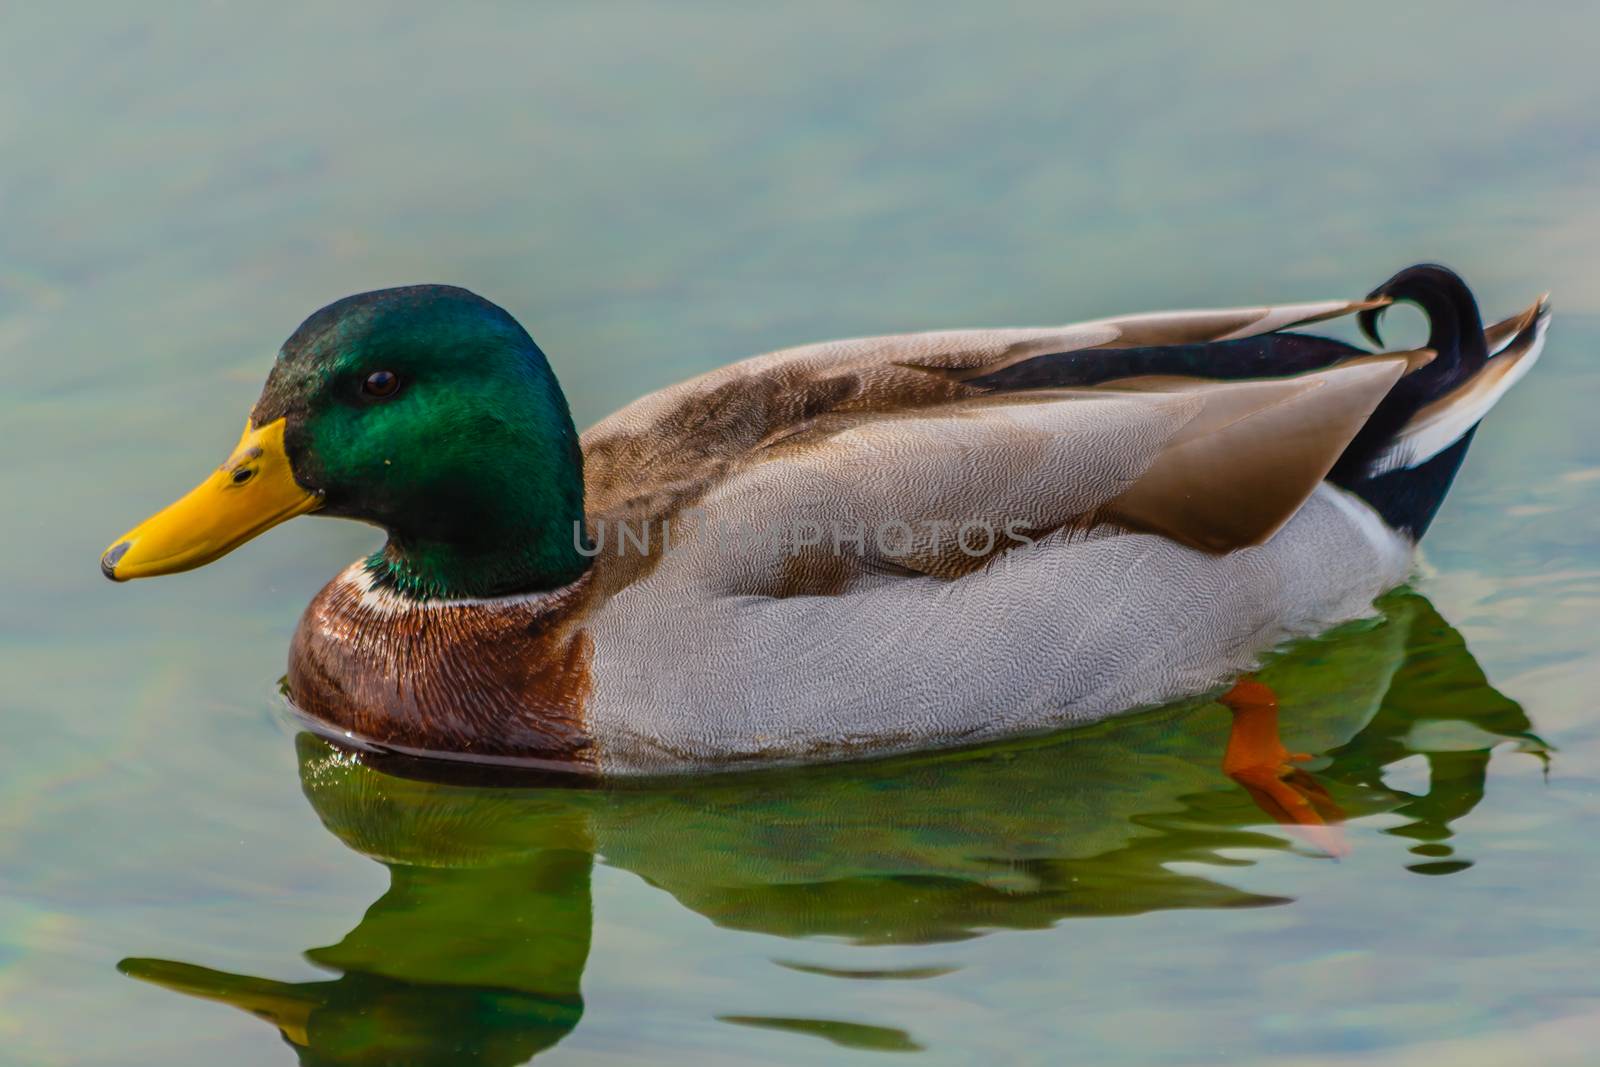 It is a water bird of the duck family living in the wetlands, in Italy it is called capoverde